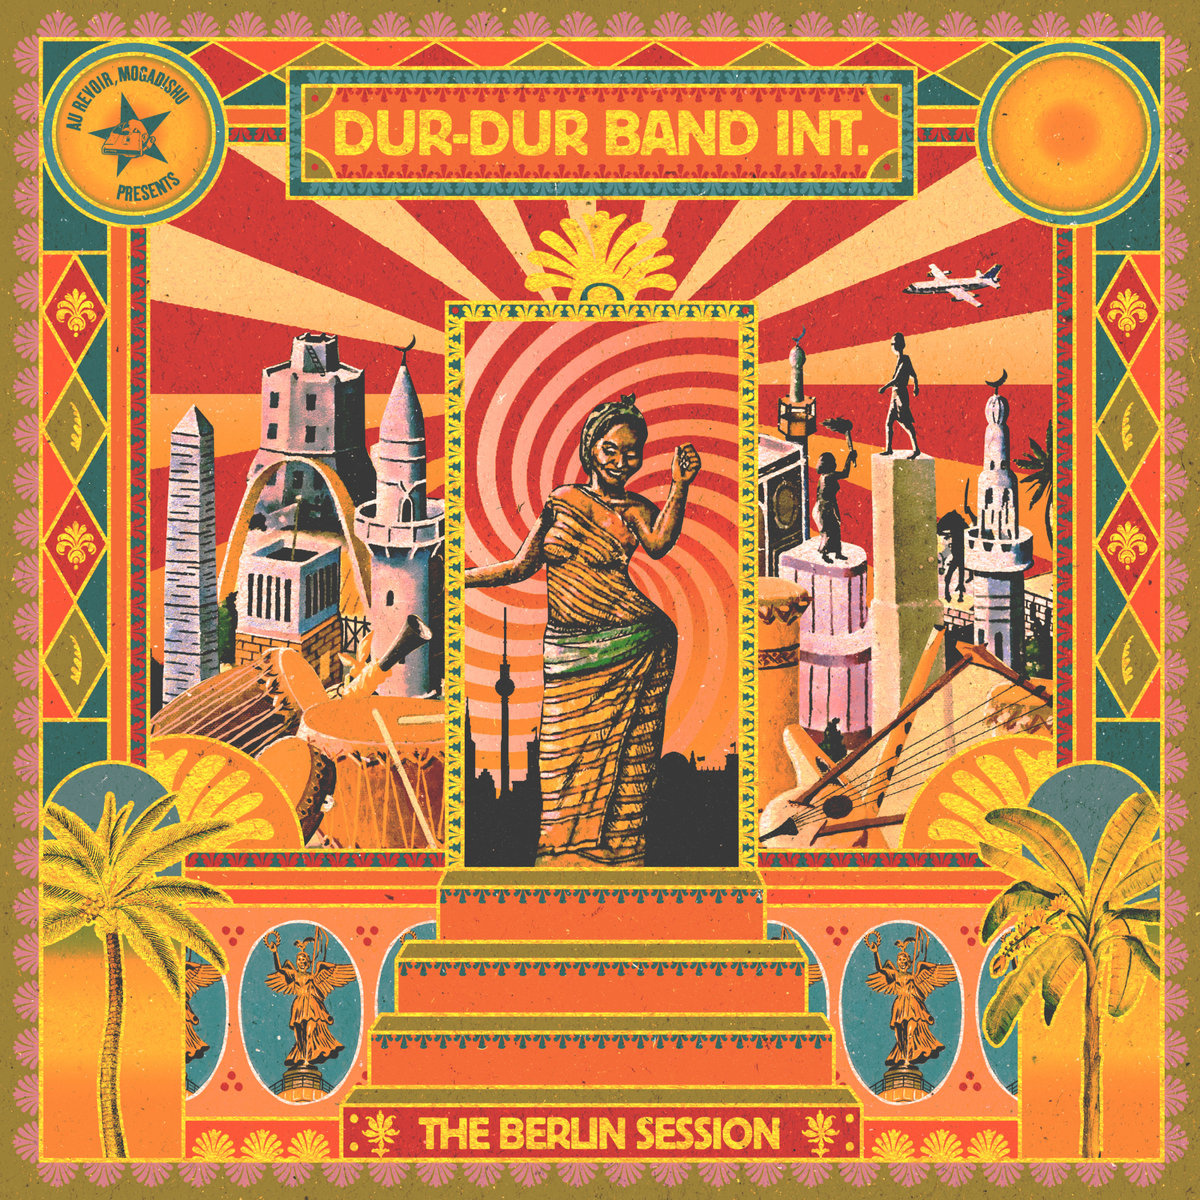 Dur-Dur Band - The Berlin Session vinyl cover